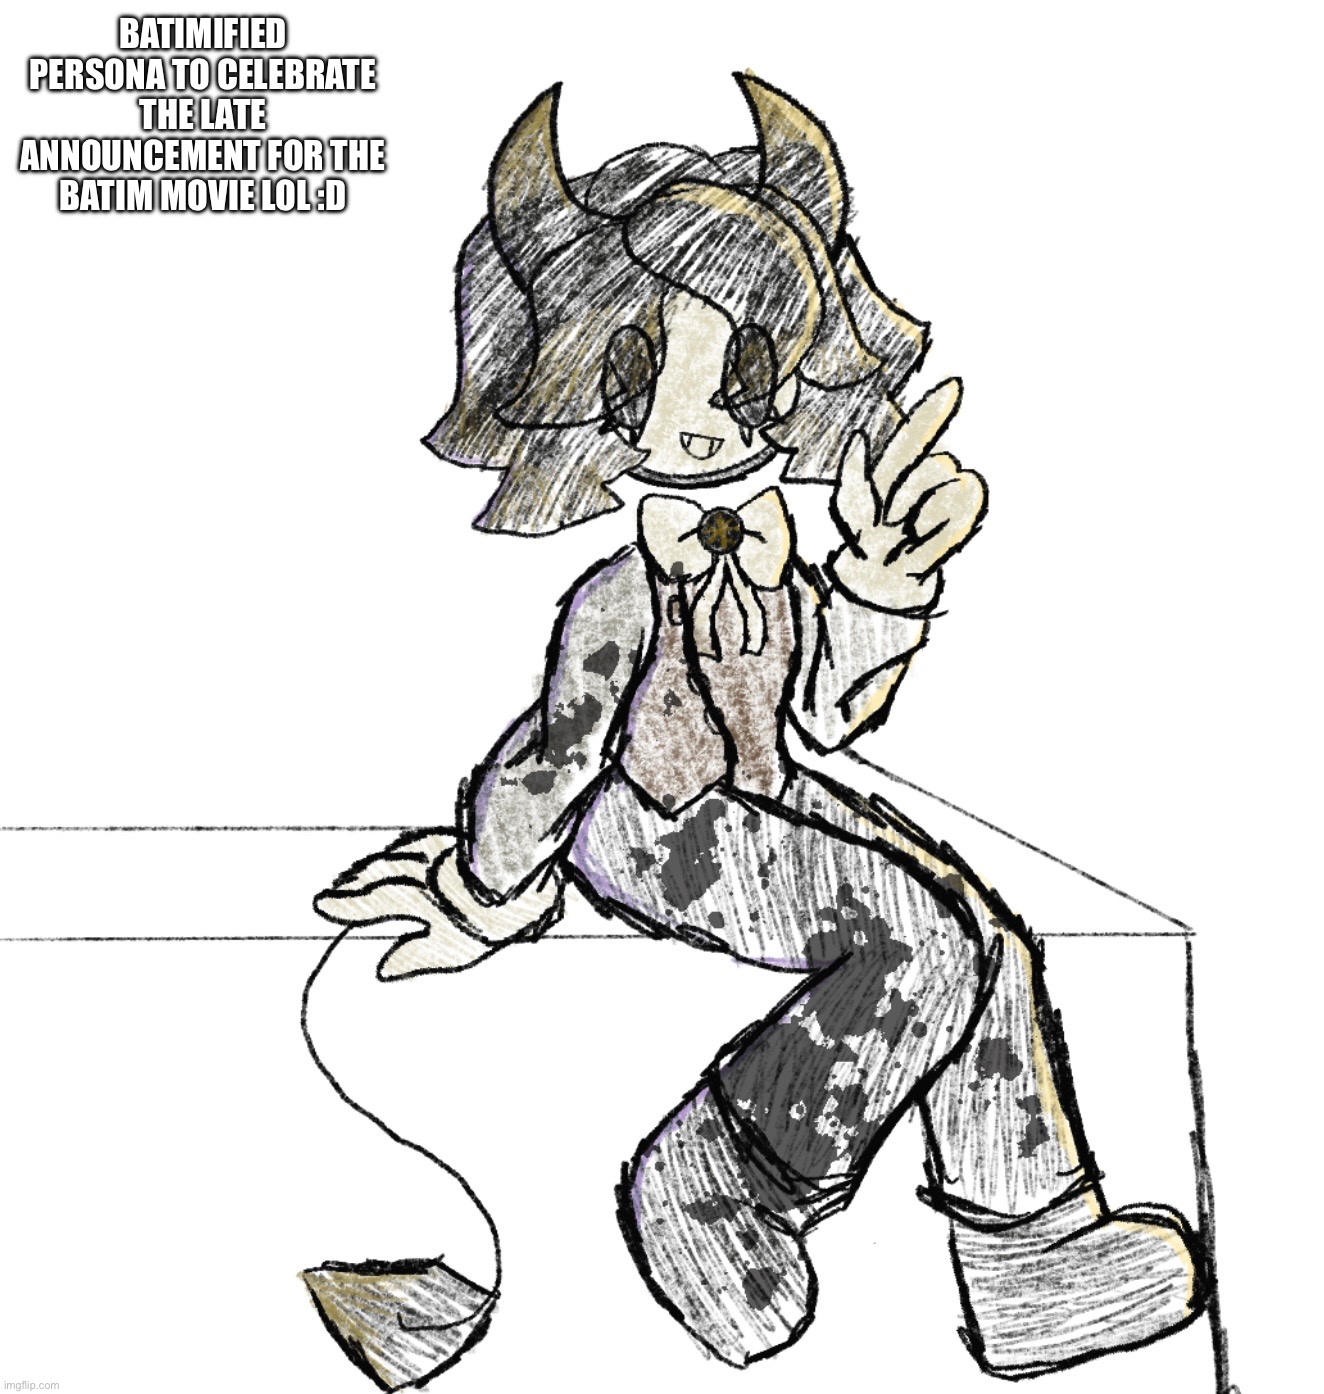 BATIMIFIED PERSONA TO CELEBRATE THE LATE ANNOUNCEMENT FOR THE BATIM MOVIE LOL :D | made w/ Imgflip meme maker